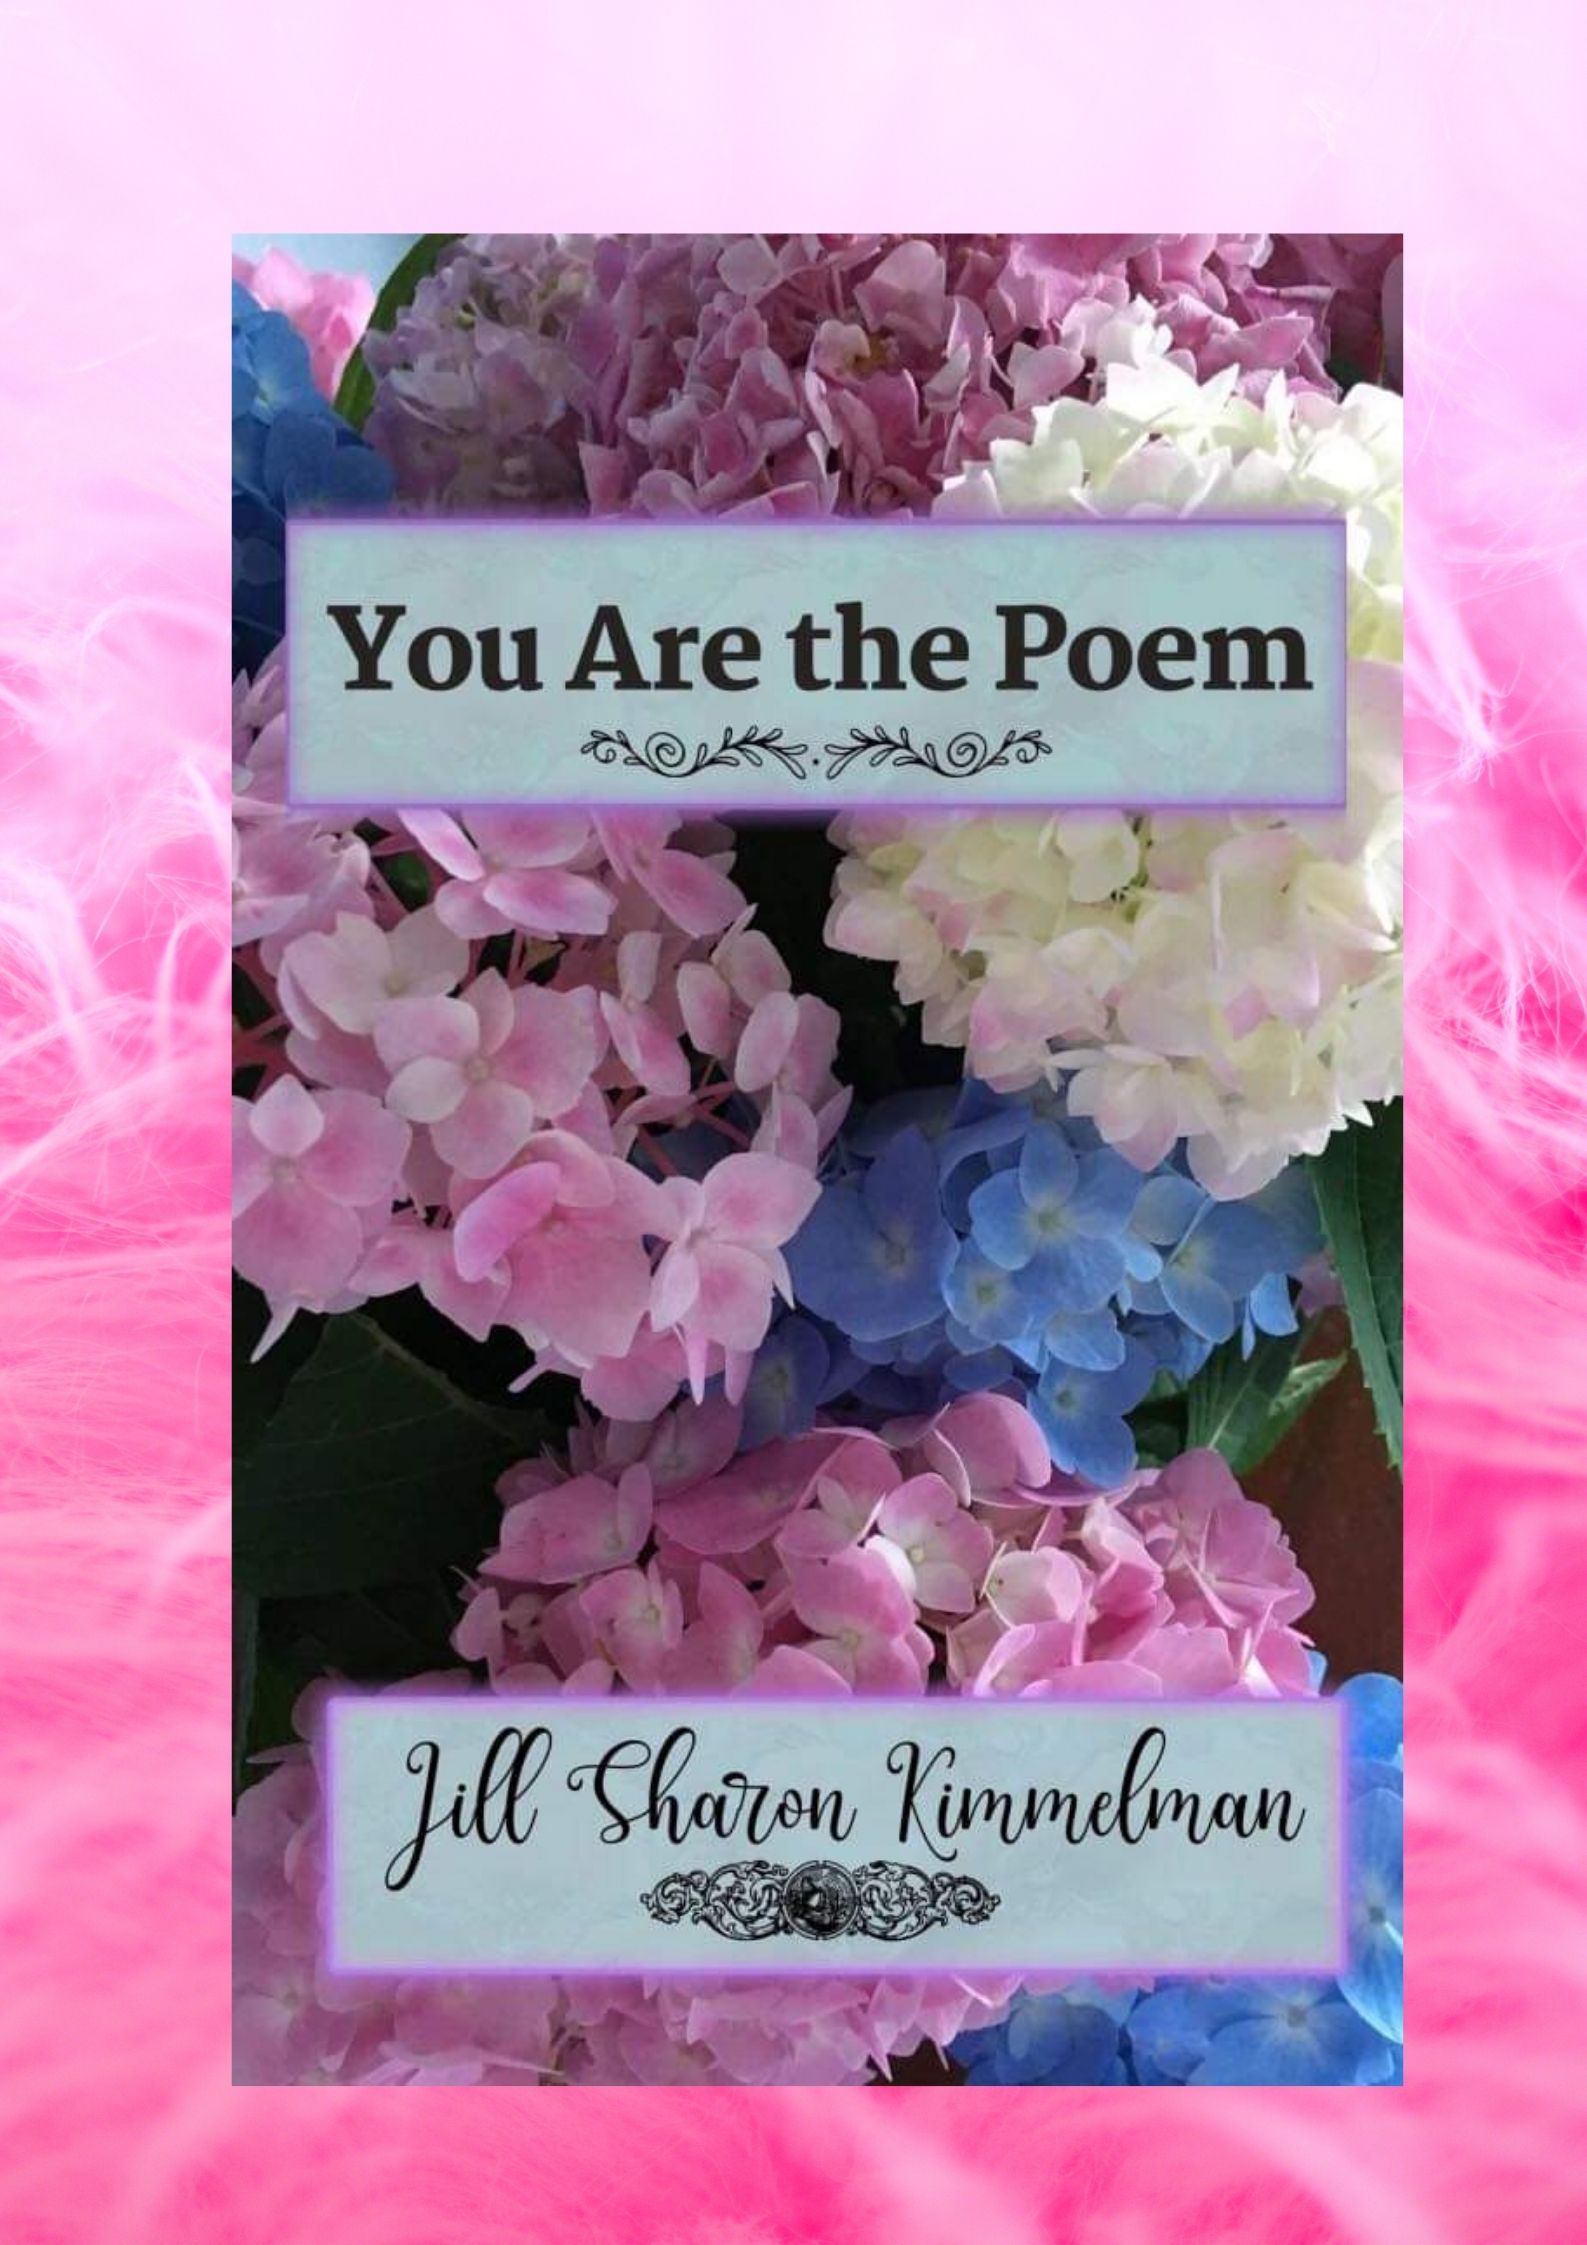 You are the Poem by Jill Sharon Kimmelman